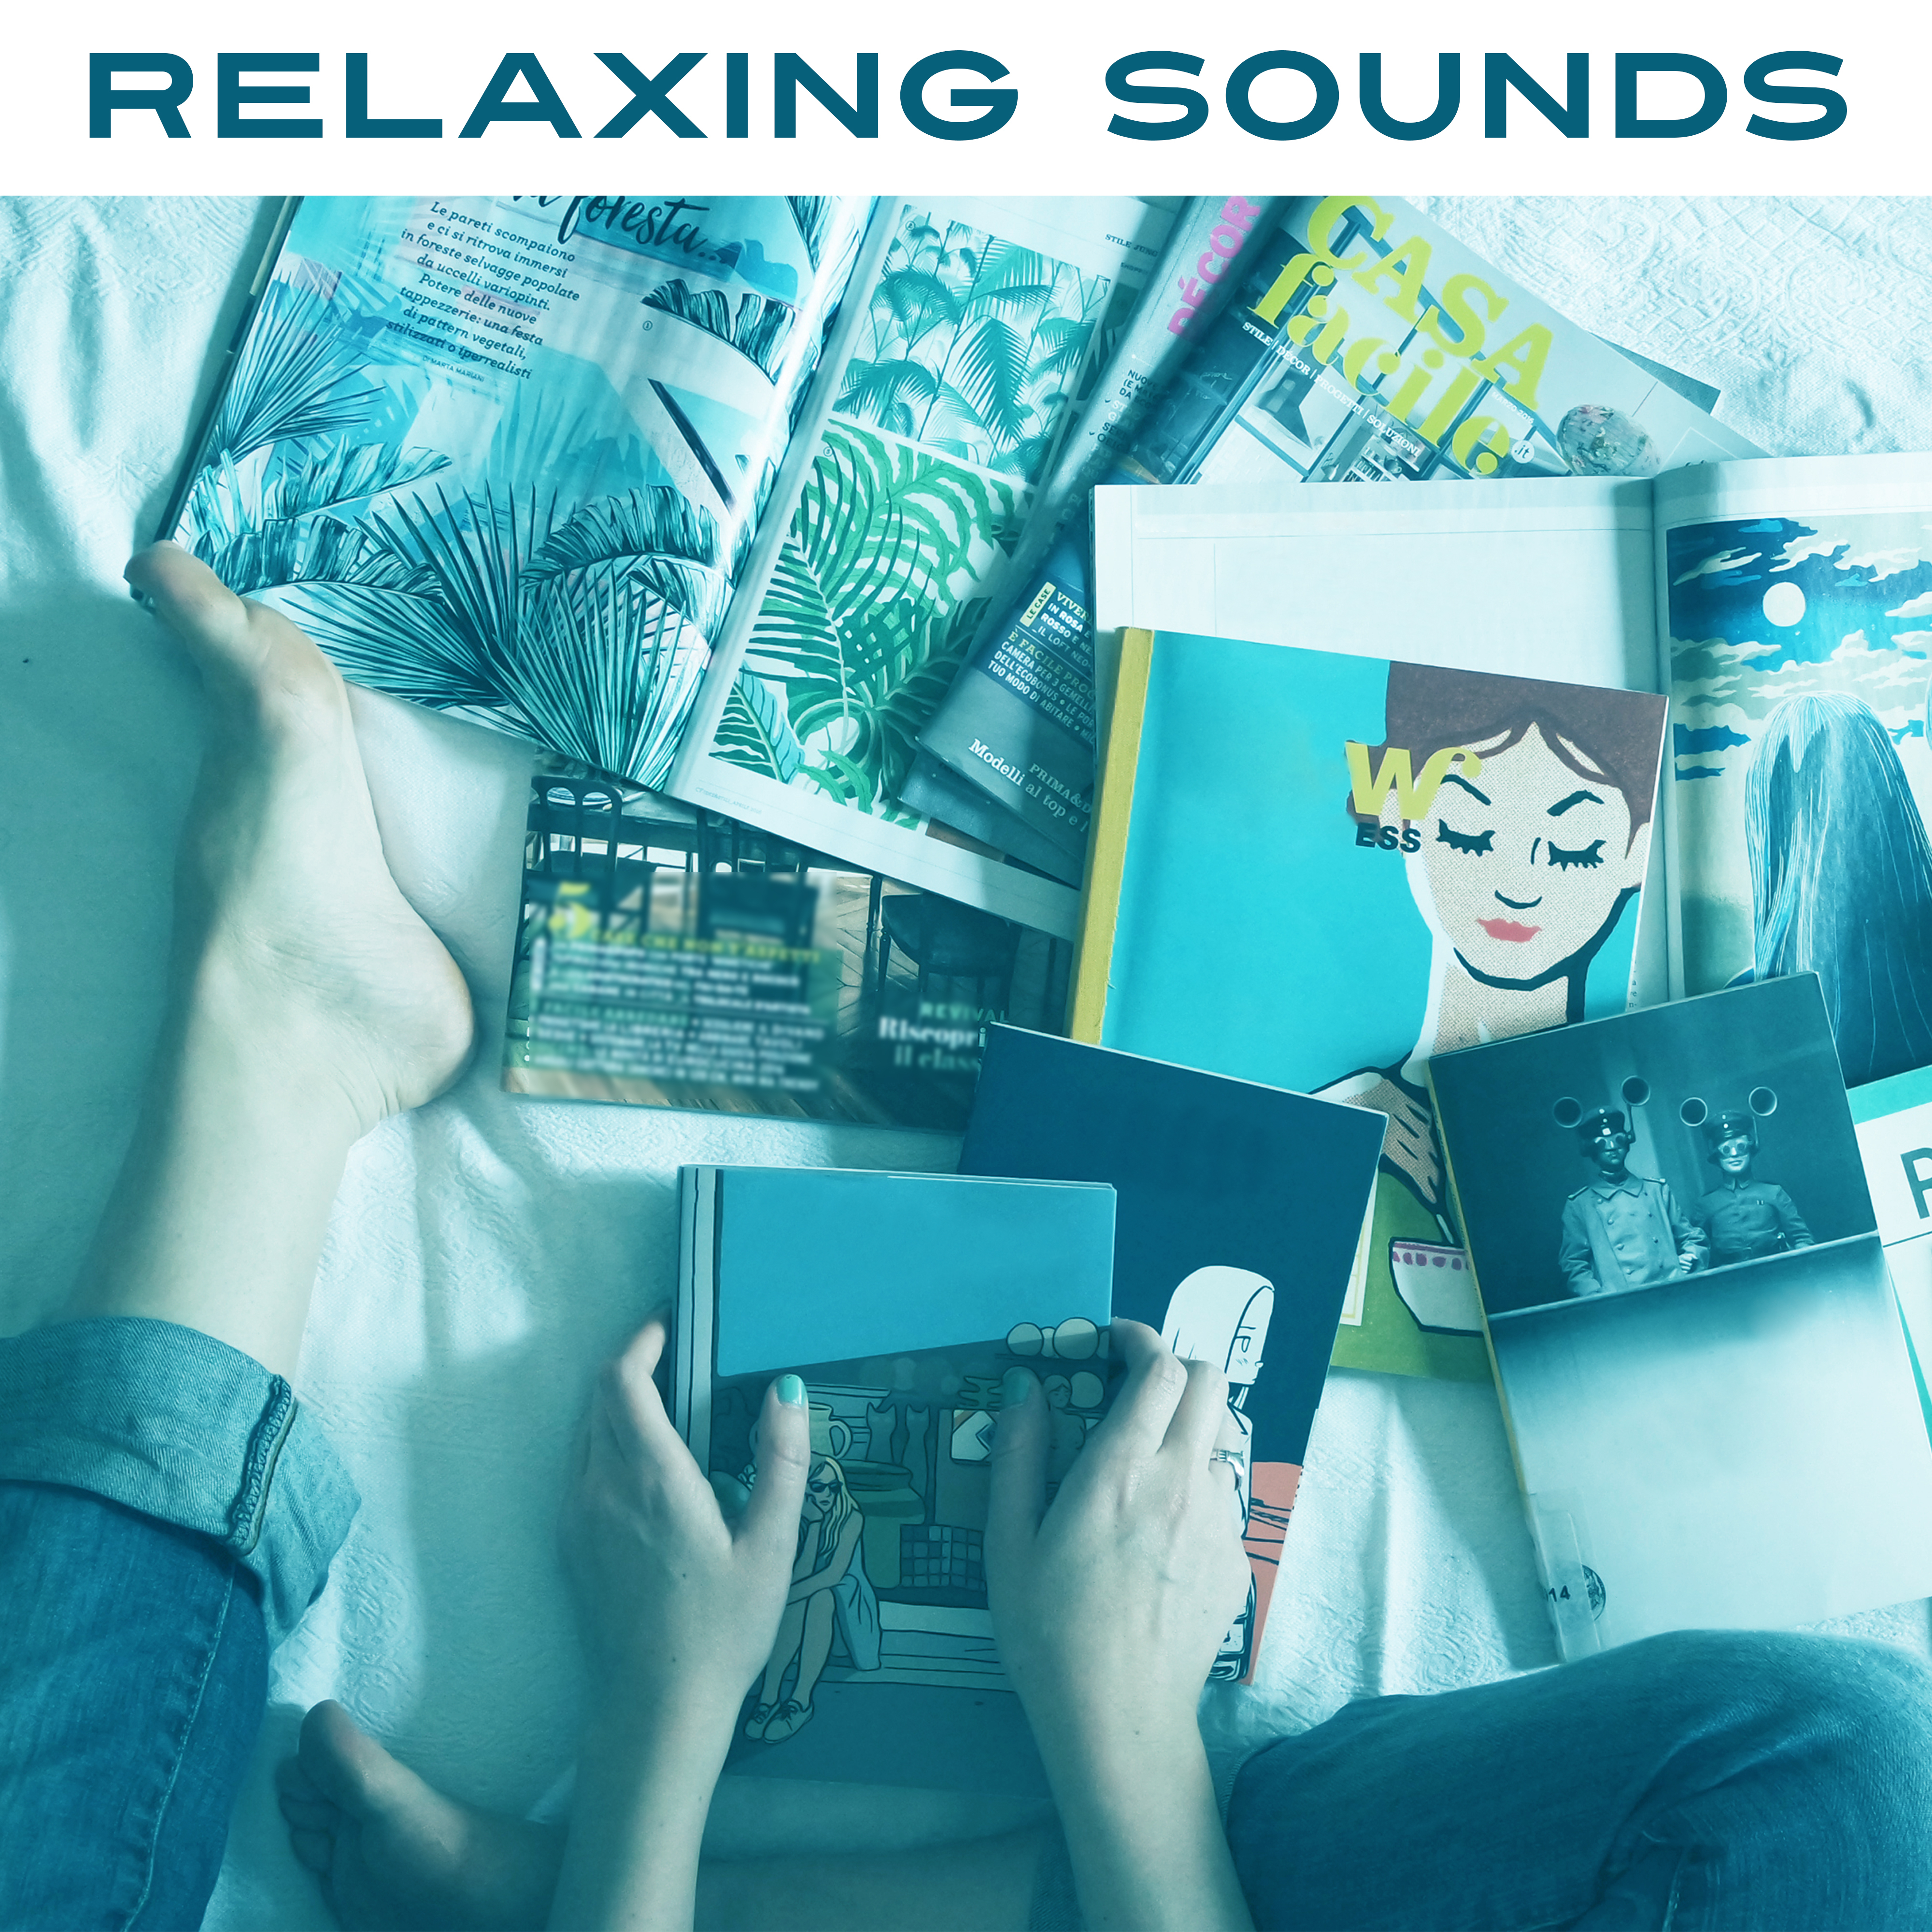 Relaxing Sounds  Soft Music, Rest  Relax, Music to Calm Down, New Age Sounds